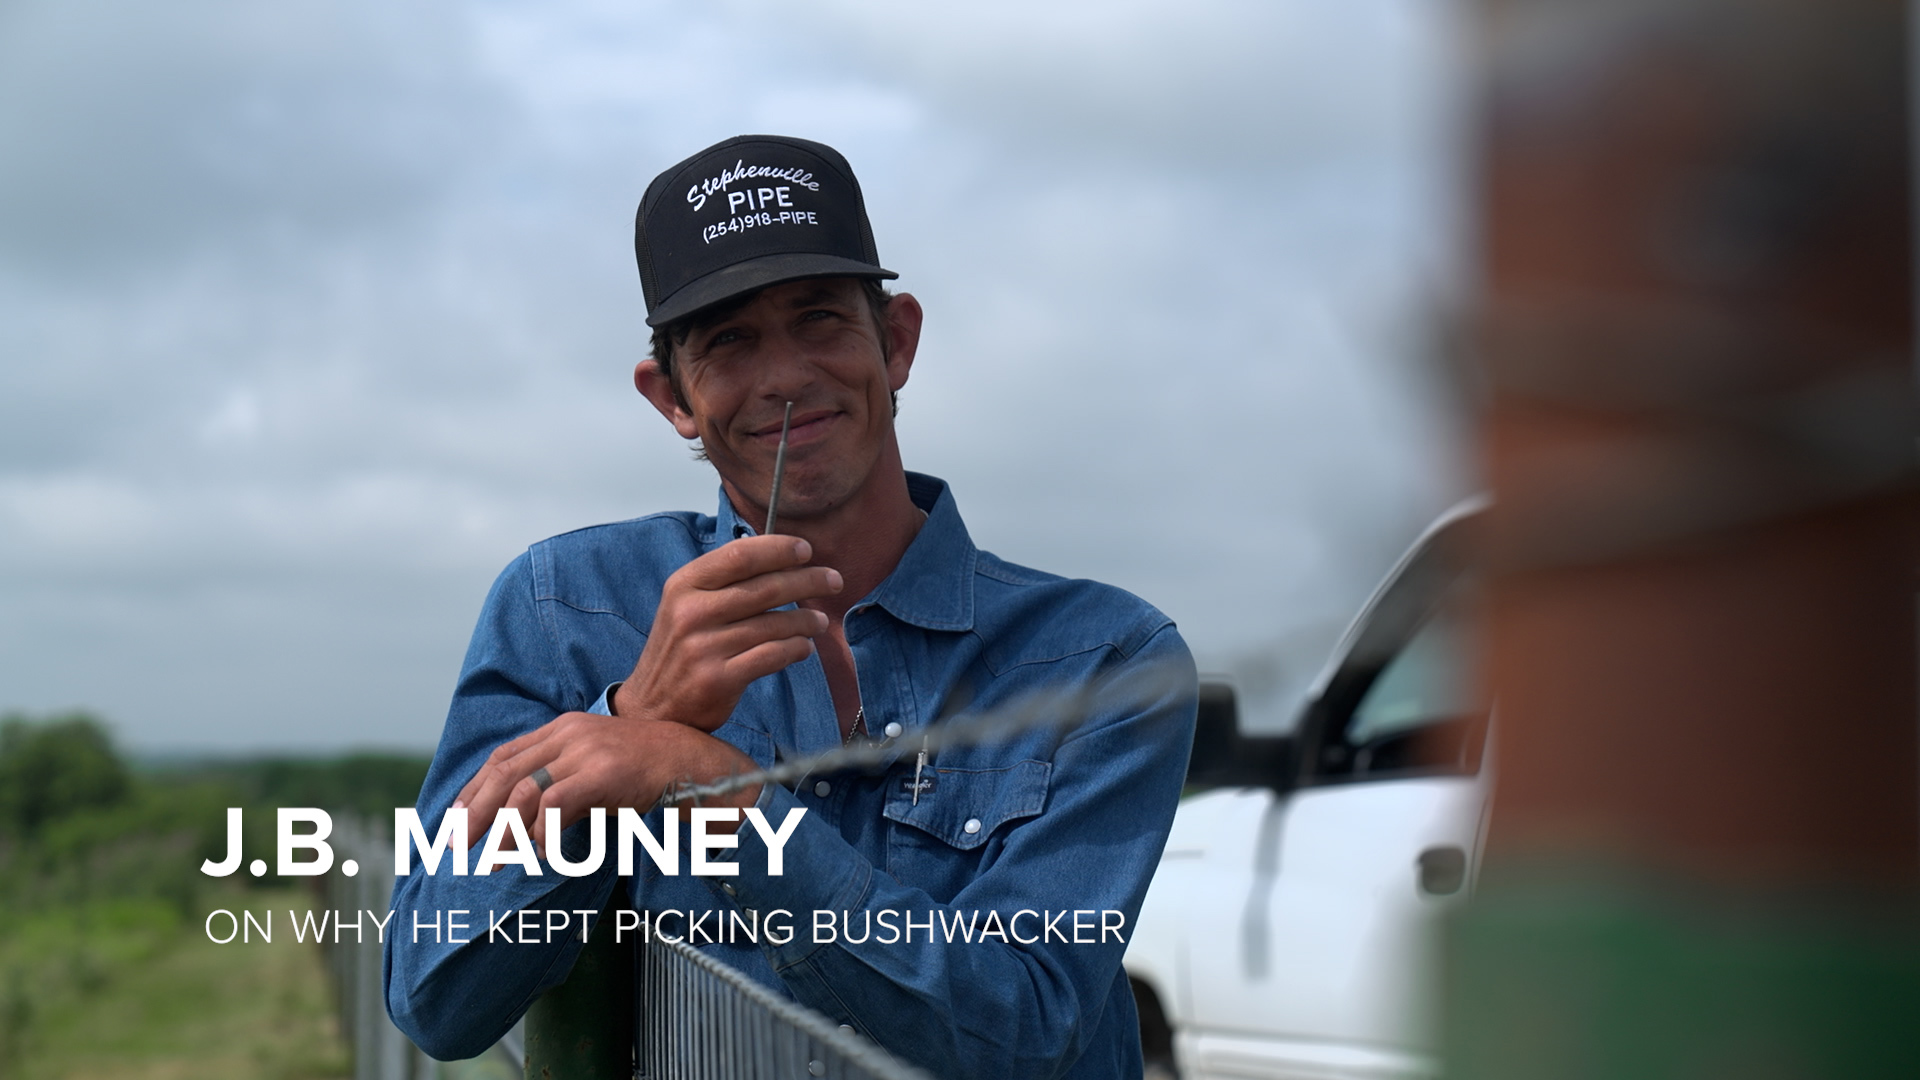 J.B. Mauney won two PBR bull riding world titles, but perhaps his biggest moment was when he finally rode the famed bull Bushwacker.